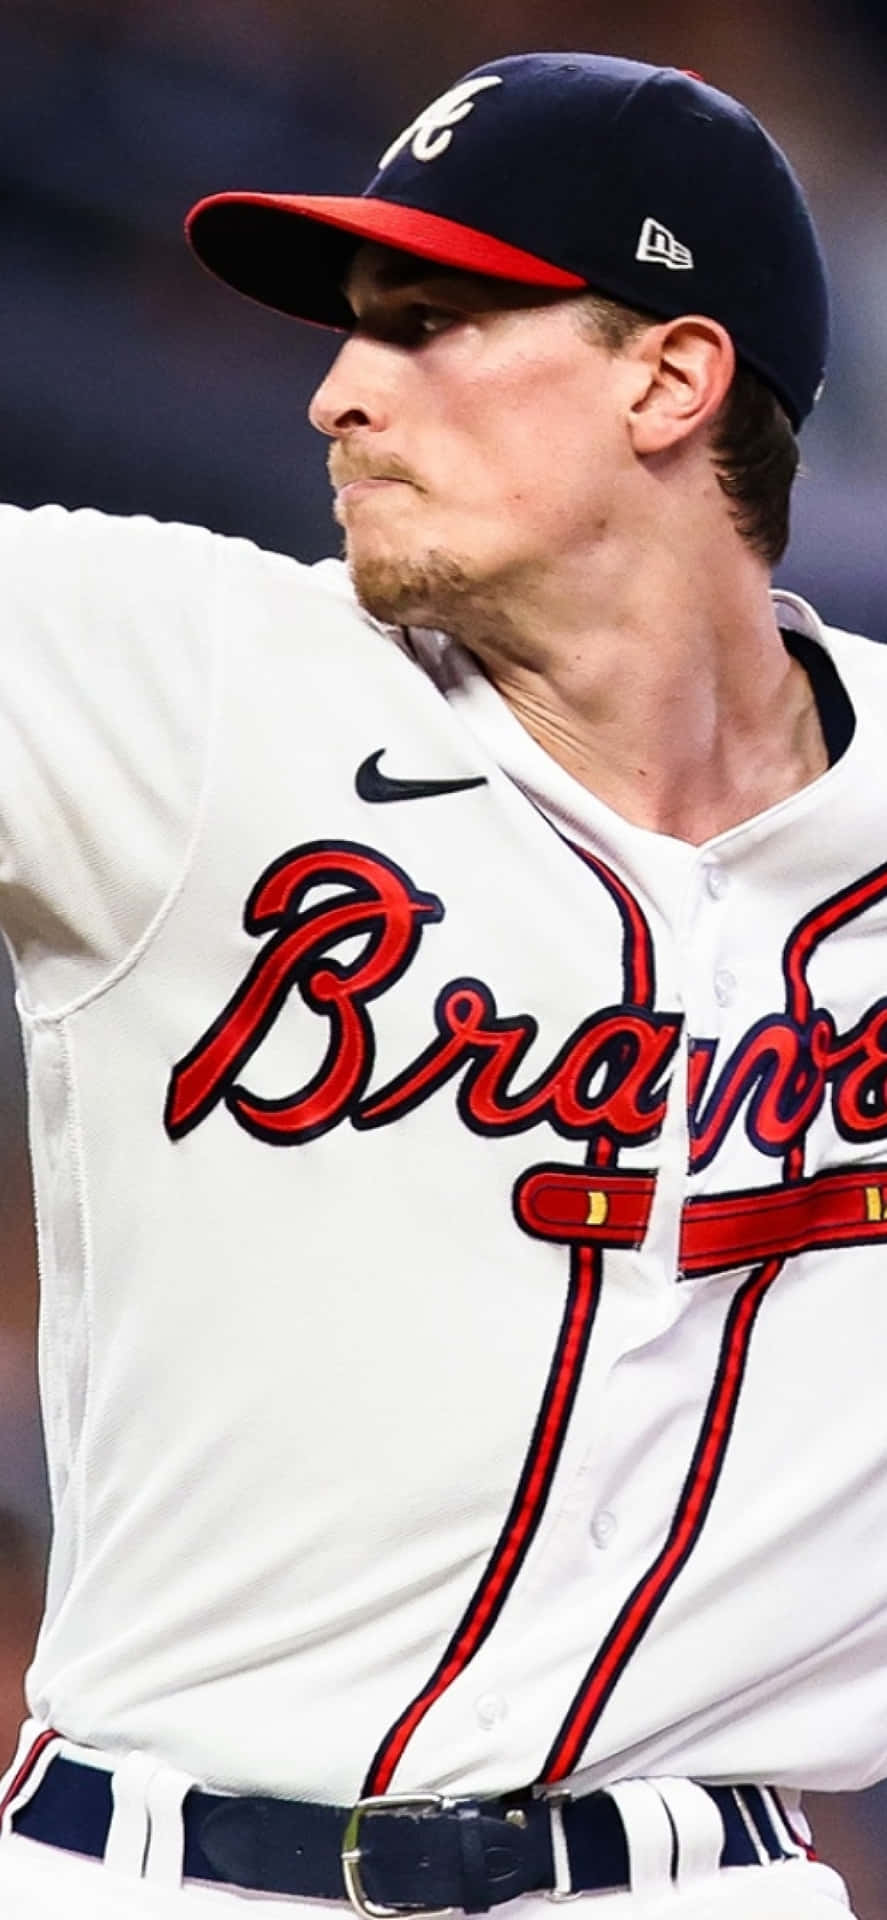 Keep up with the Atlanta Braves on your iPhone Wallpaper